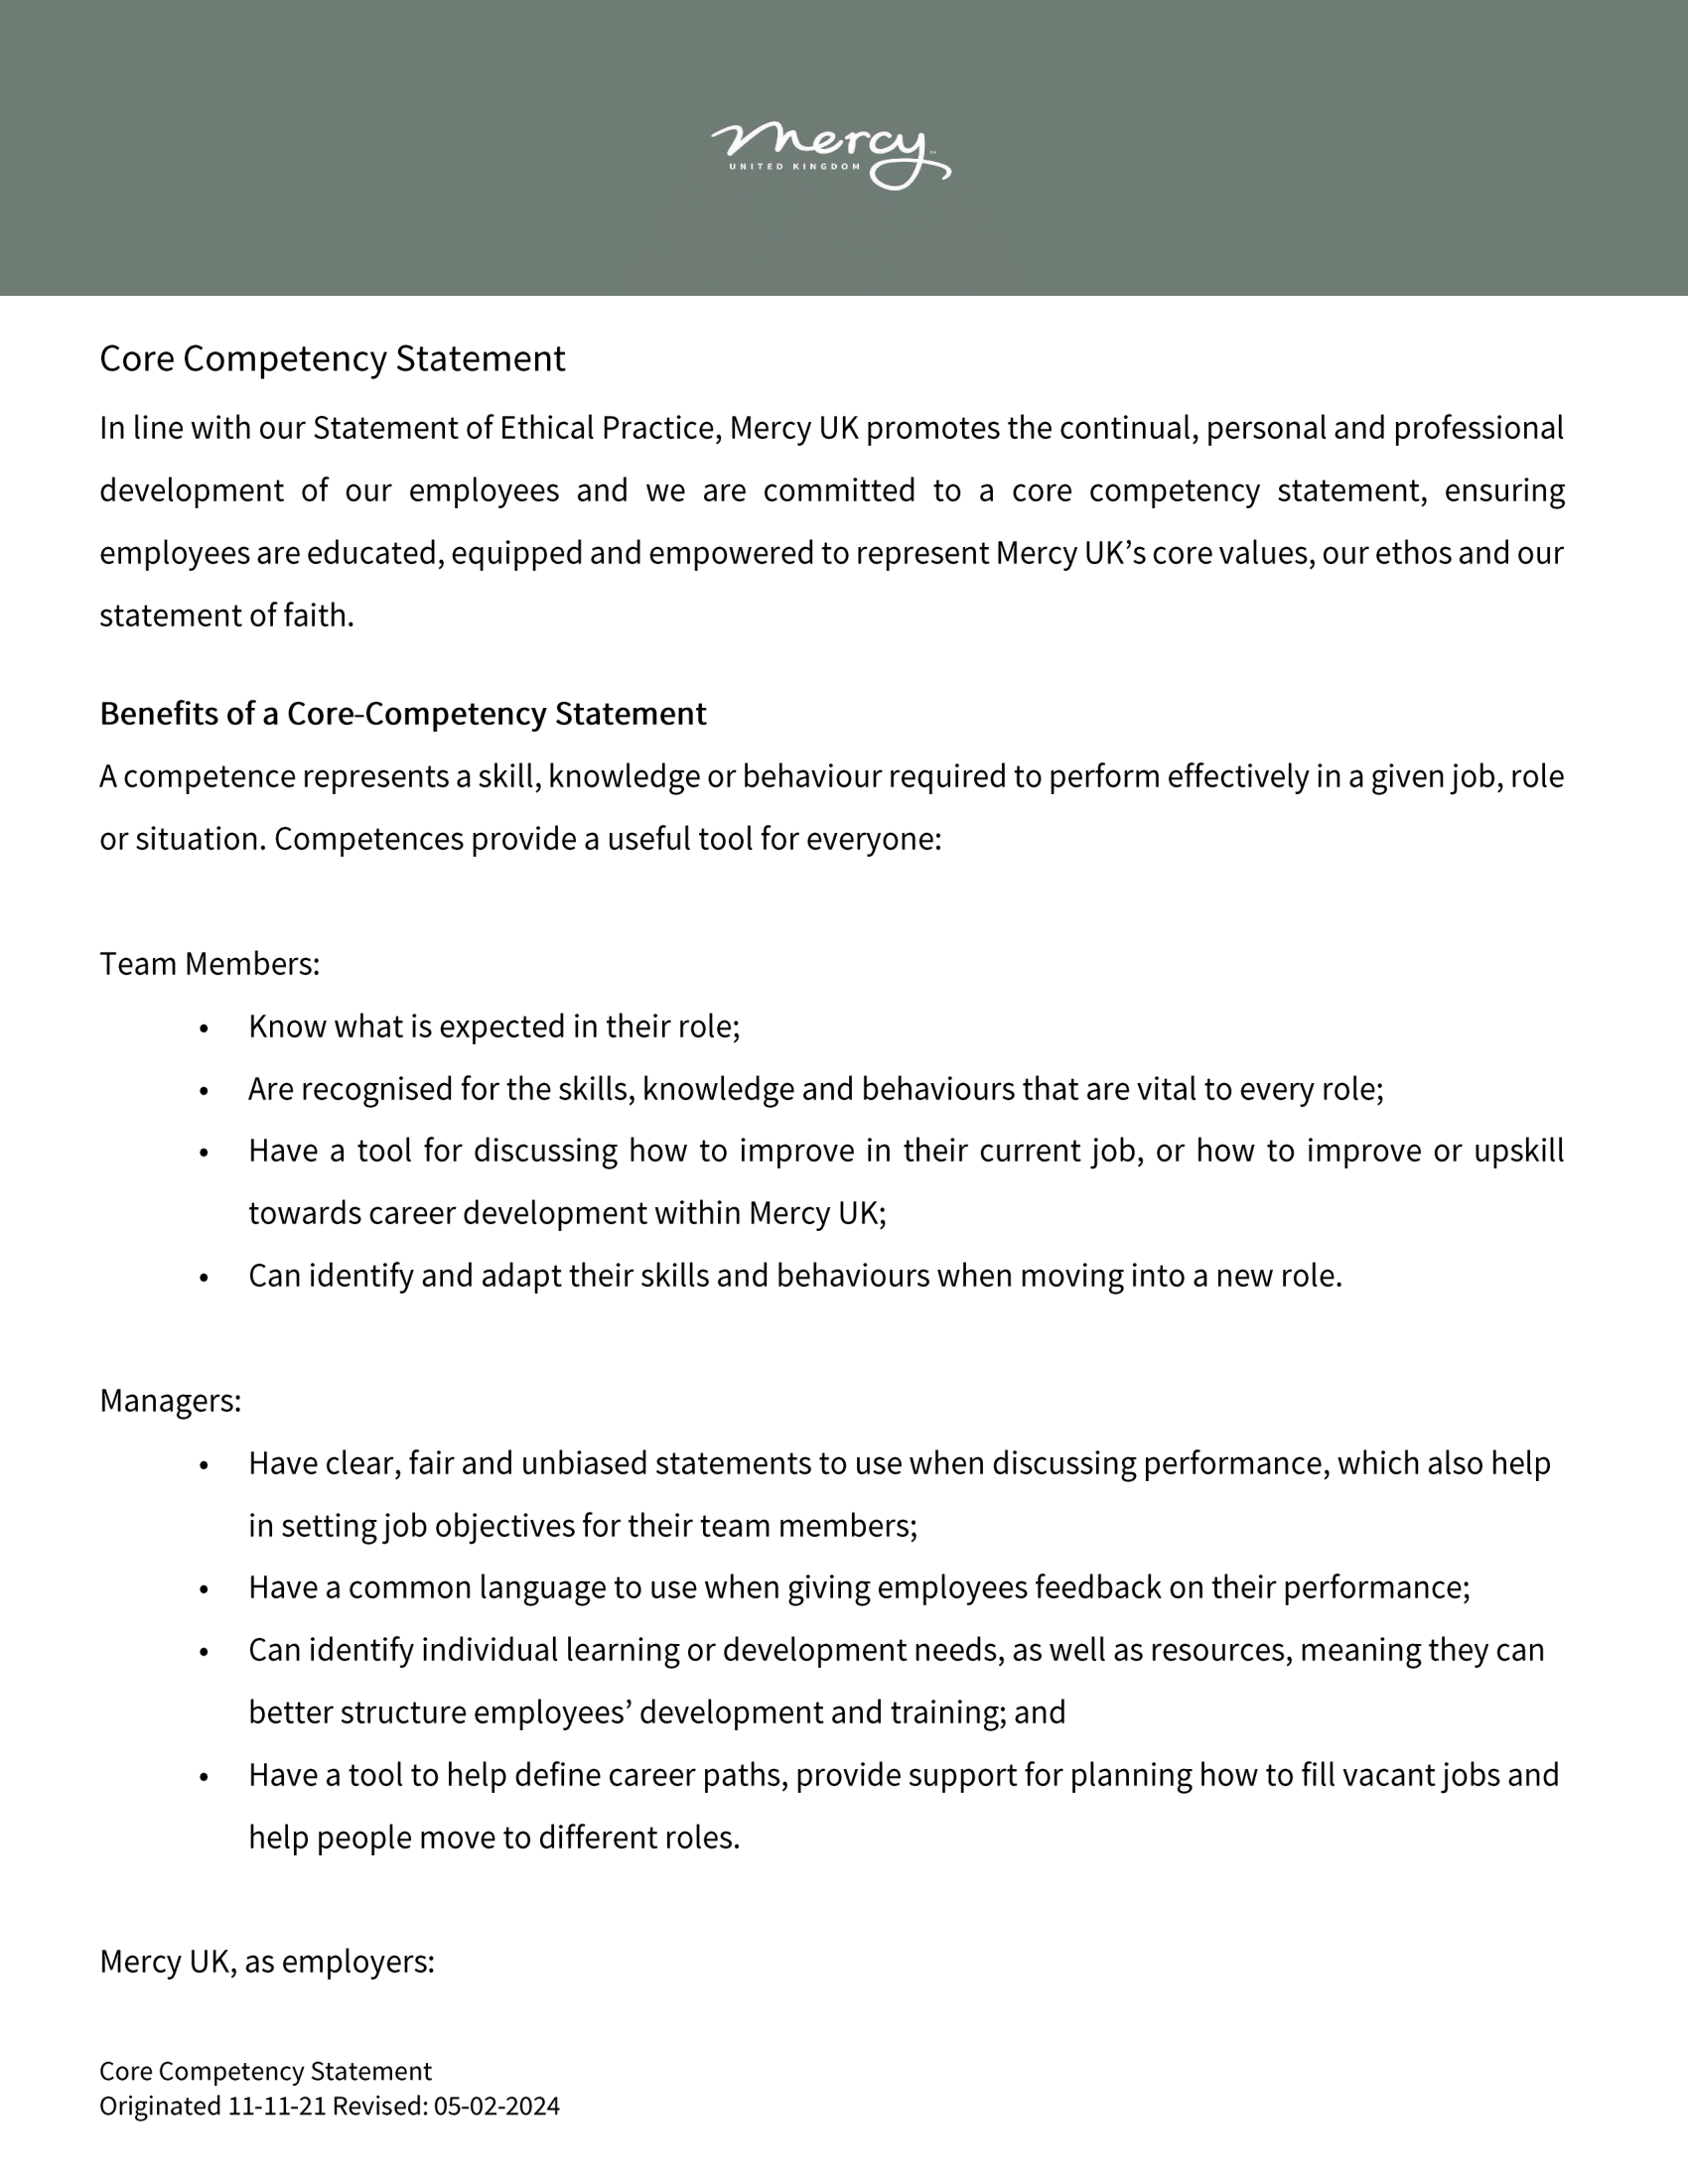 Core Competency Statement revised 02-2024-1.png